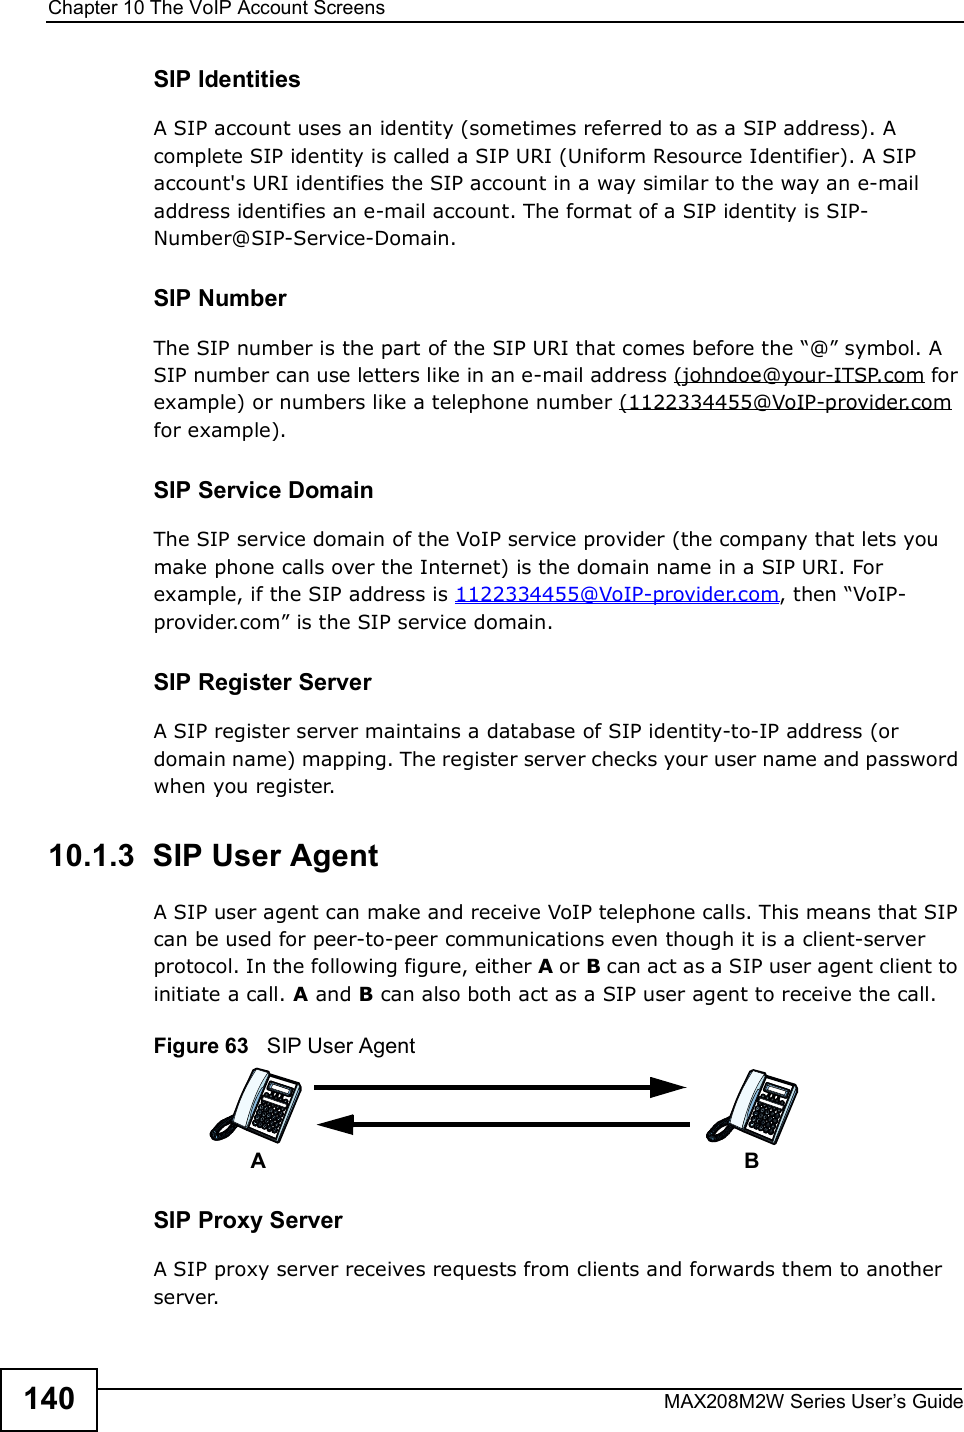 Chapter 10The VoIP Account ScreensMAX208M2W Series User s Guide140SIP IdentitiesA SIP account uses an identity (sometimes referred to as a SIP address). A complete SIP identity is called a SIP URI (Uniform Resource Identifier). A SIP account&apos;s URI identifies the SIP account in a way similar to the way an e-mail address identifies an e-mail account. The format of a SIP identity is SIP-Number@SIP-Service-Domain.SIP NumberThe SIP number is the part of the SIP URI that comes before the &quot;@# symbol. A SIP number can use letters like in an e-mail address (johndoe@your-ITSP.com for example) or numbers like a telephone number (1122334455@VoIP-provider.com for example).SIP Service DomainThe SIP service domain of the VoIP service provider (the company that lets you make phone calls over the Internet) is the domain name in a SIP URI. For example, if the SIP address is 1122334455@VoIP-provider.com, then &quot;VoIP-provider.com# is the SIP service domain.SIP Register ServerA SIP register server maintains a database of SIP identity-to-IP address (or domain name) mapping. The register server checks your user name and password when you register. 10.1.3  SIP User Agent A SIP user agent can make and receive VoIP telephone calls. This means that SIP can be used for peer-to-peer communications even though it is a client-server protocol. In the following figure, either A or B can act as a SIP user agent client to initiate a call. A and B can also both act as a SIP user agent to receive the call.Figure 63   SIP User AgentSIP Proxy ServerA SIP proxy server receives requests from clients and forwards them to another server.AB